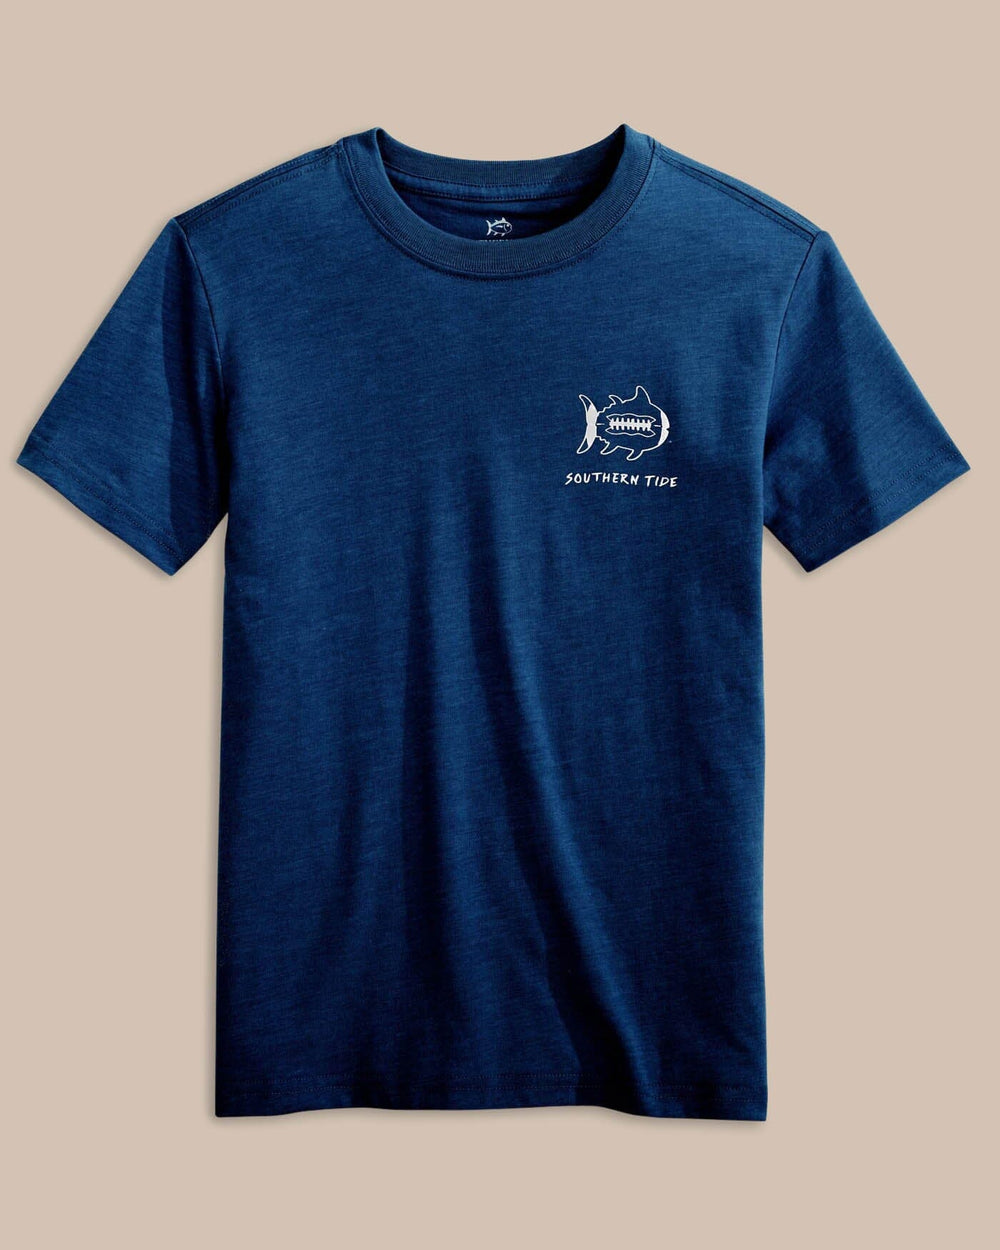 The front view of the Southern Tide Kids Sketched Football Heather T-Shirt by Southern Tide - True Navy